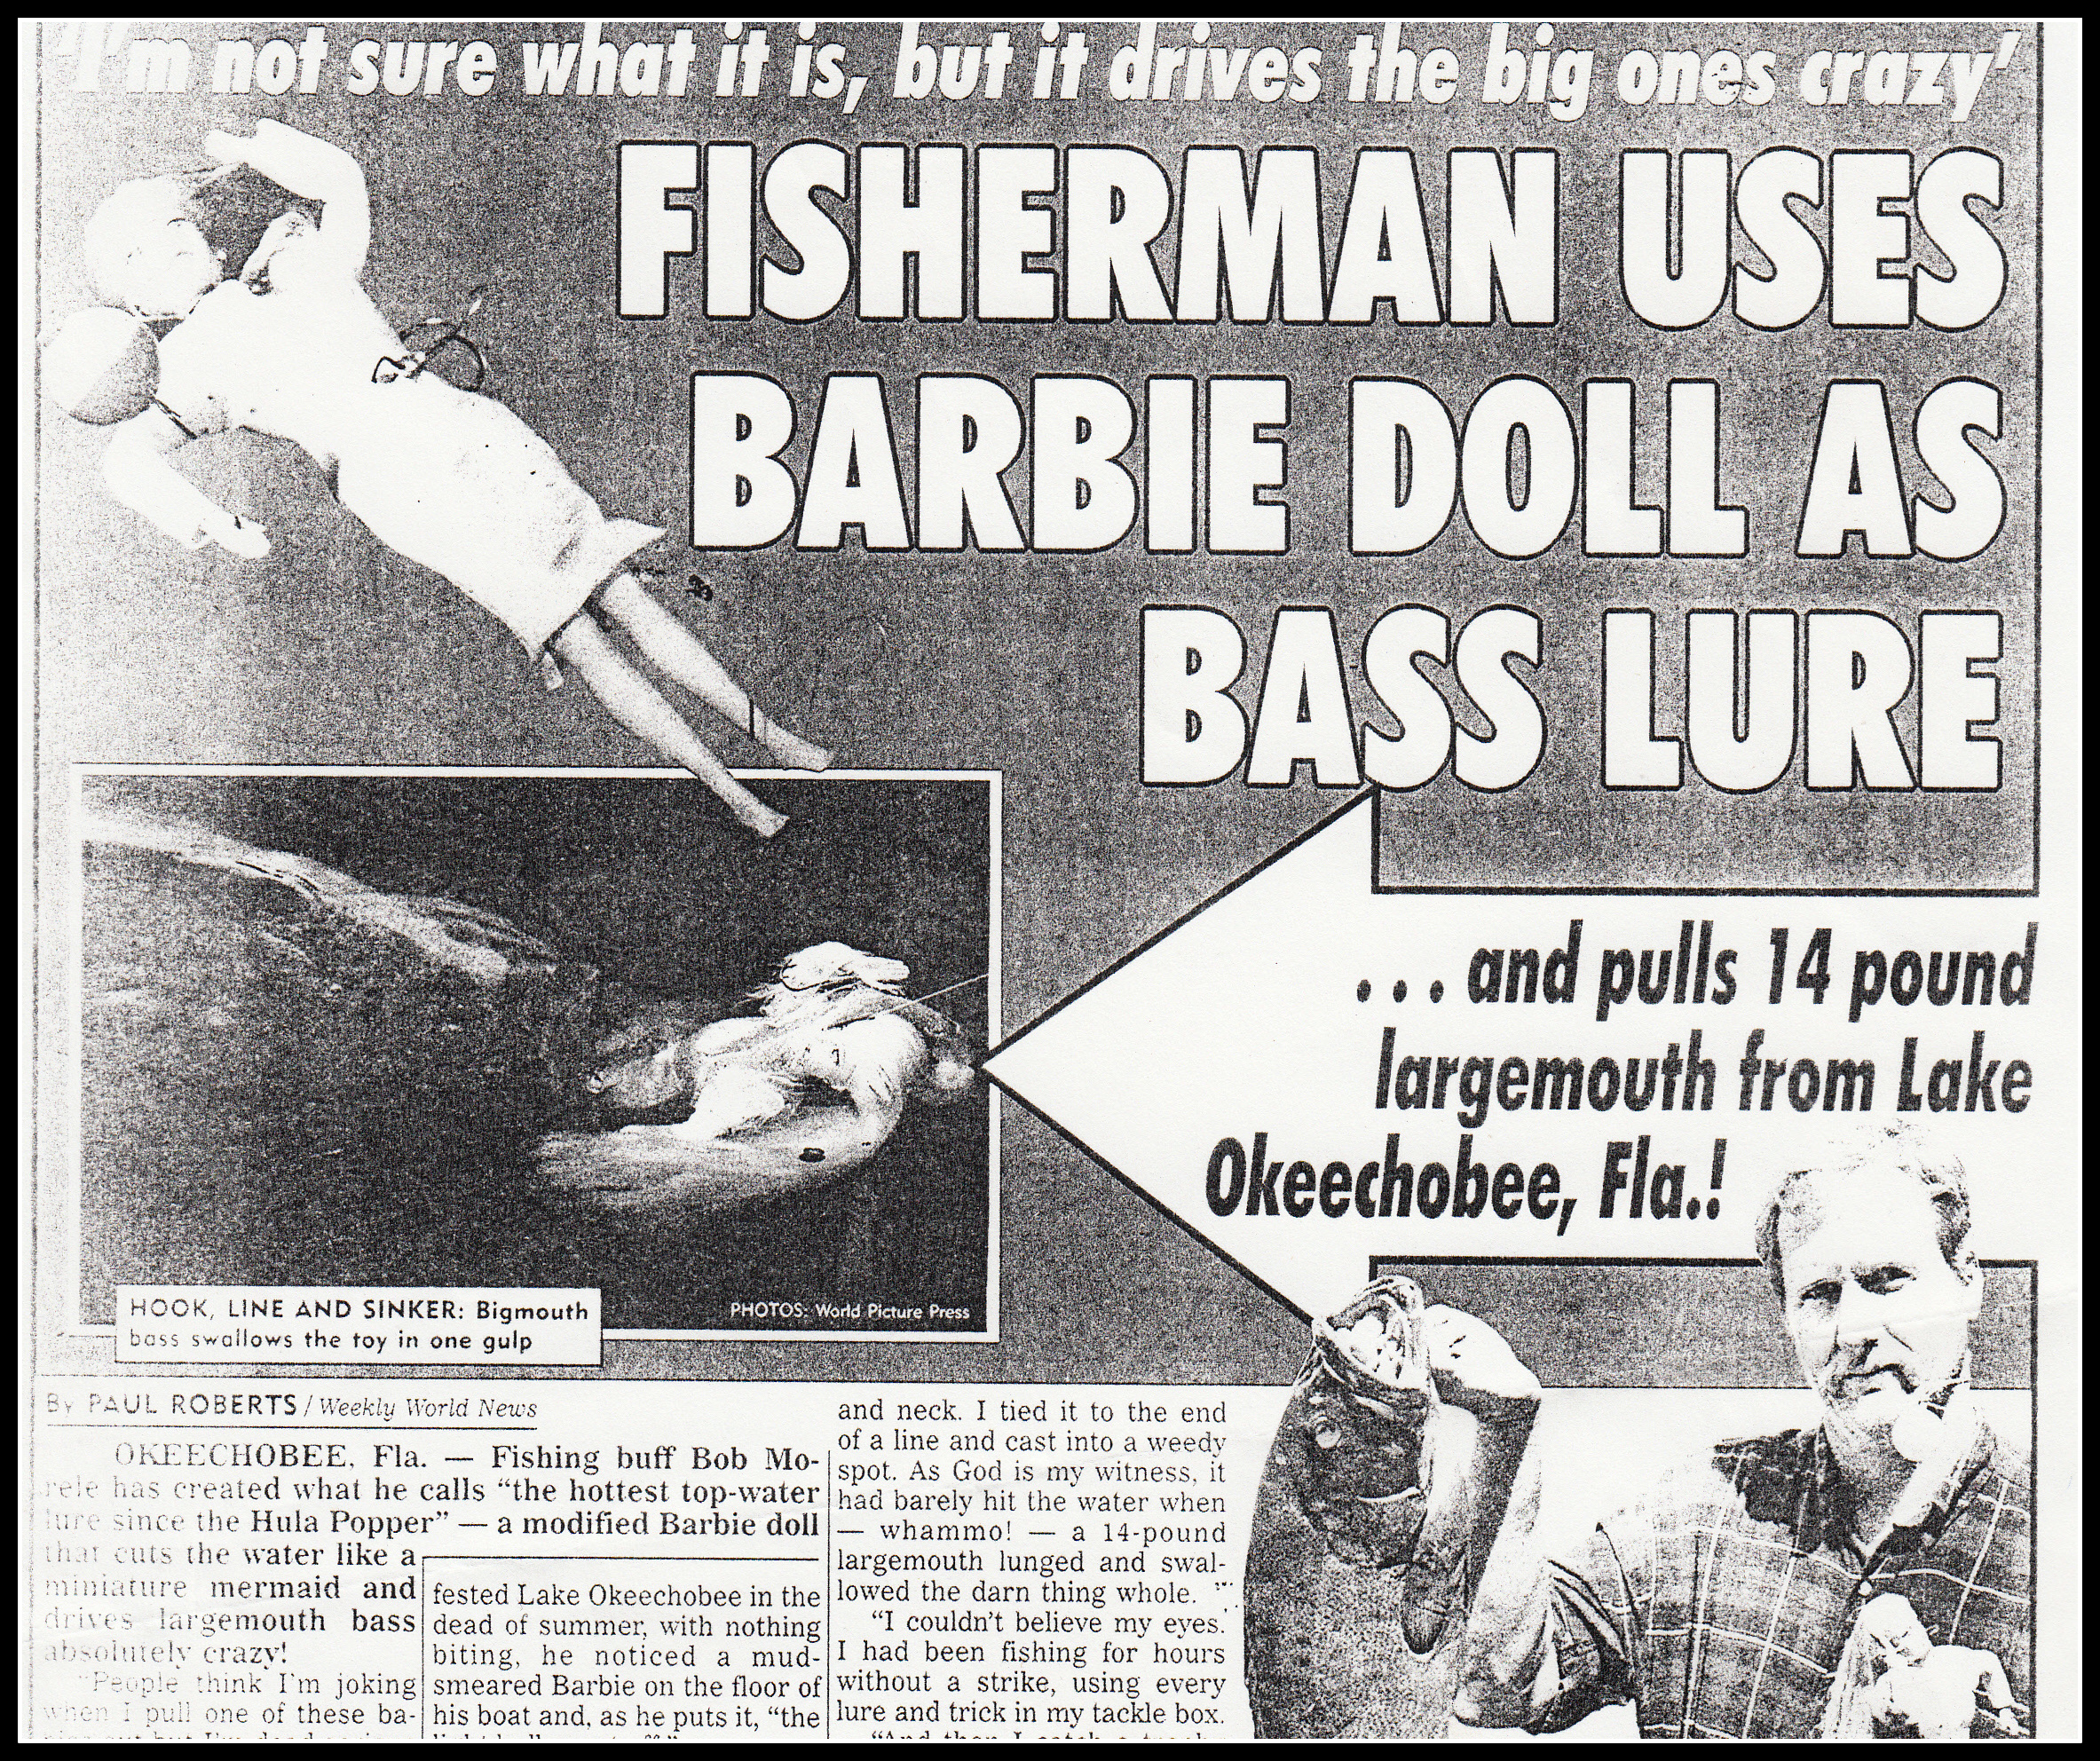 Weekly World News says Barbie used to catch fish!